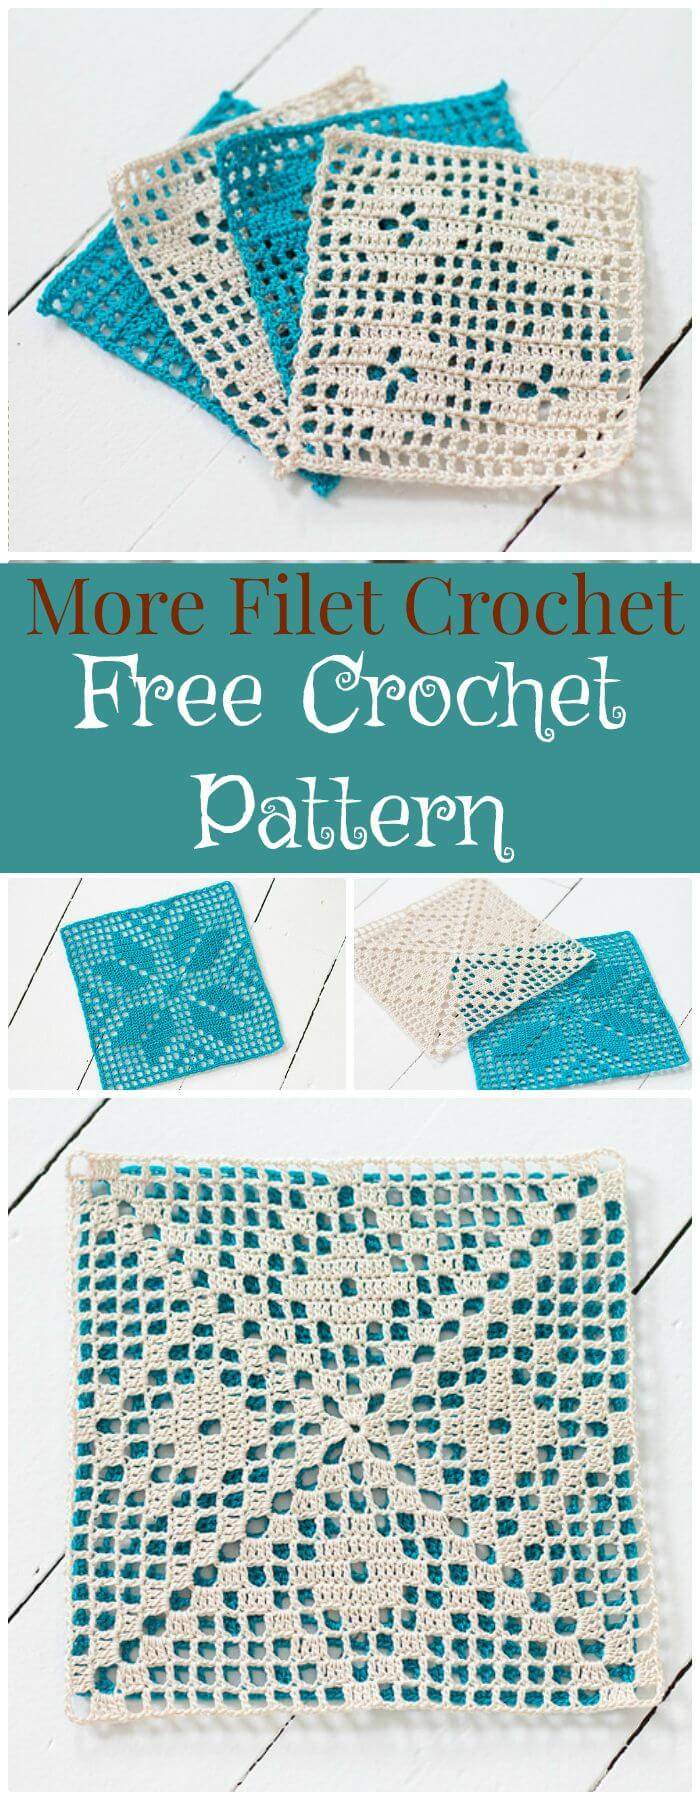 Crochet Coasters 70 Free Patterns For Beginners Diy Crafts,Sun Conure Baby